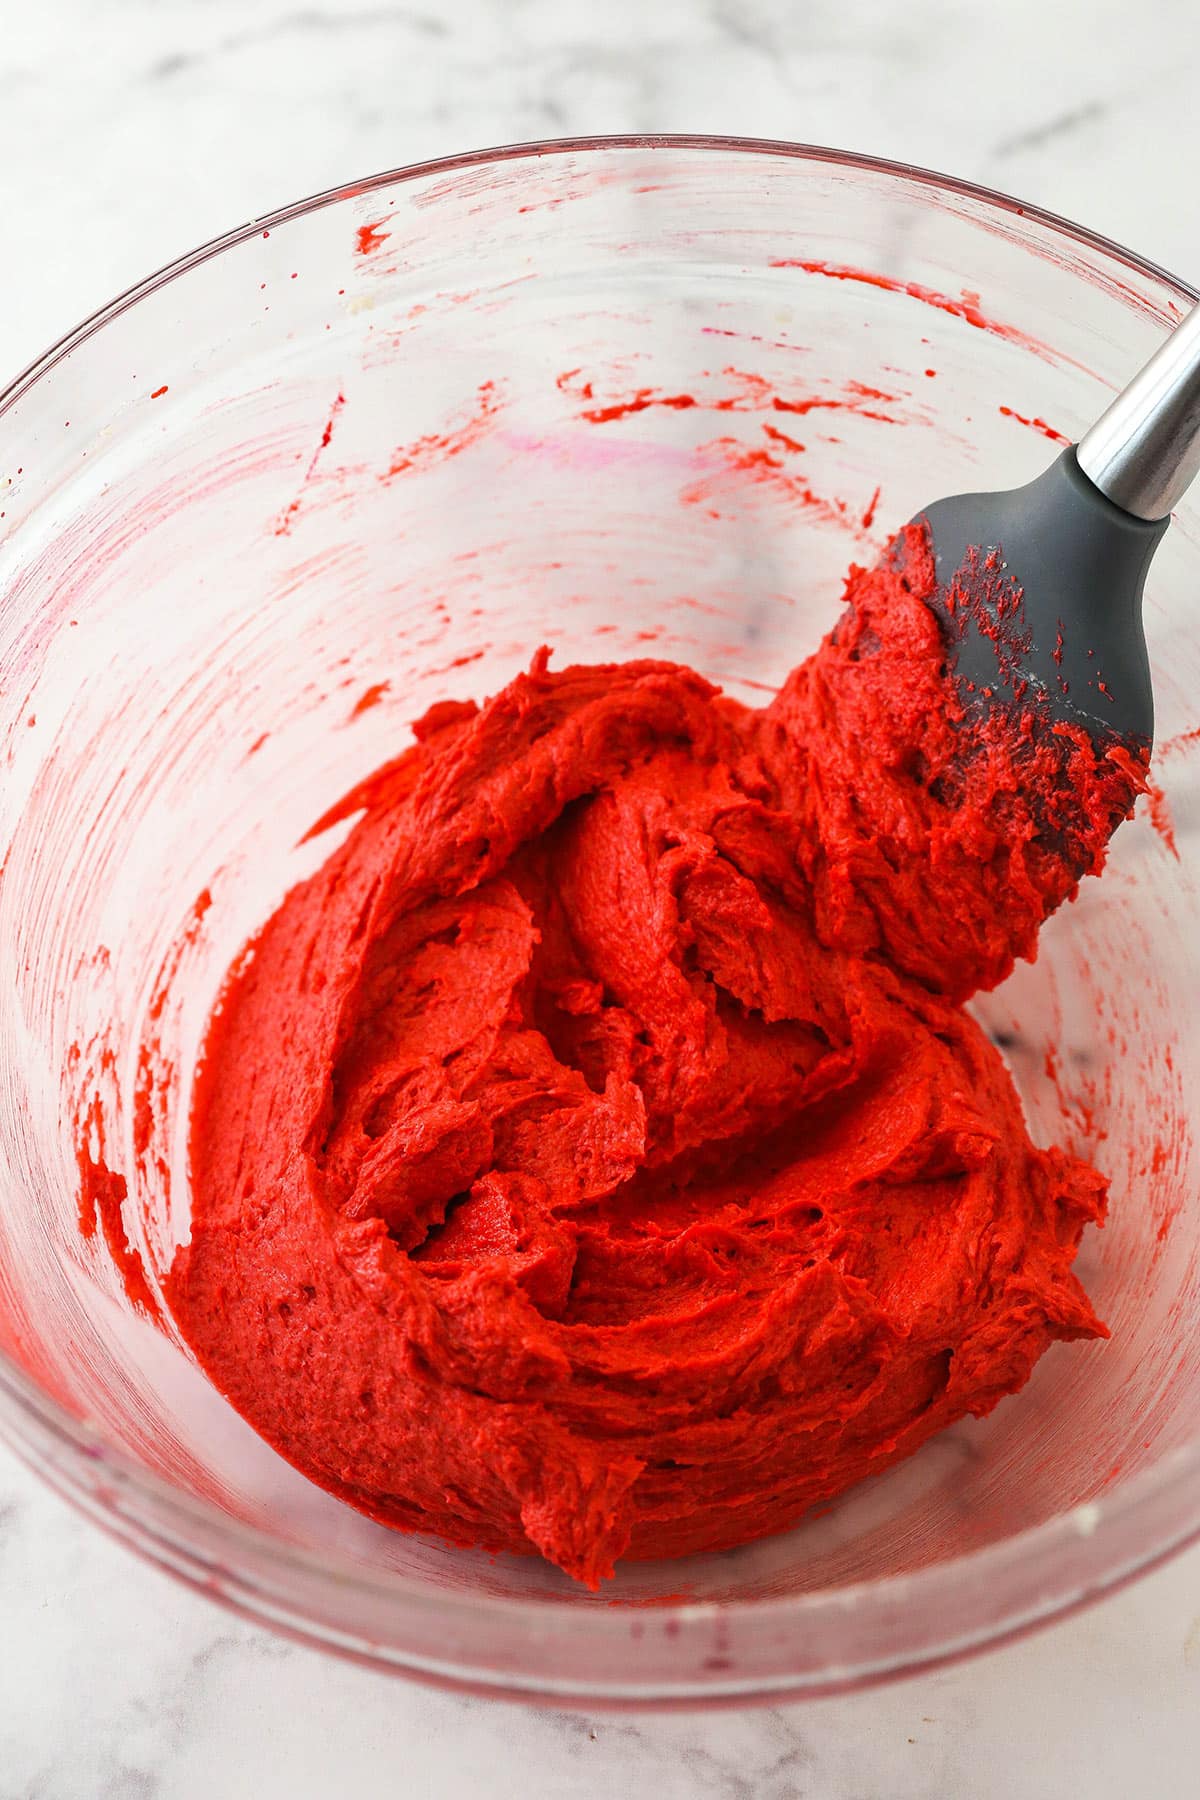 Creamed butter mixture with red food coloring.